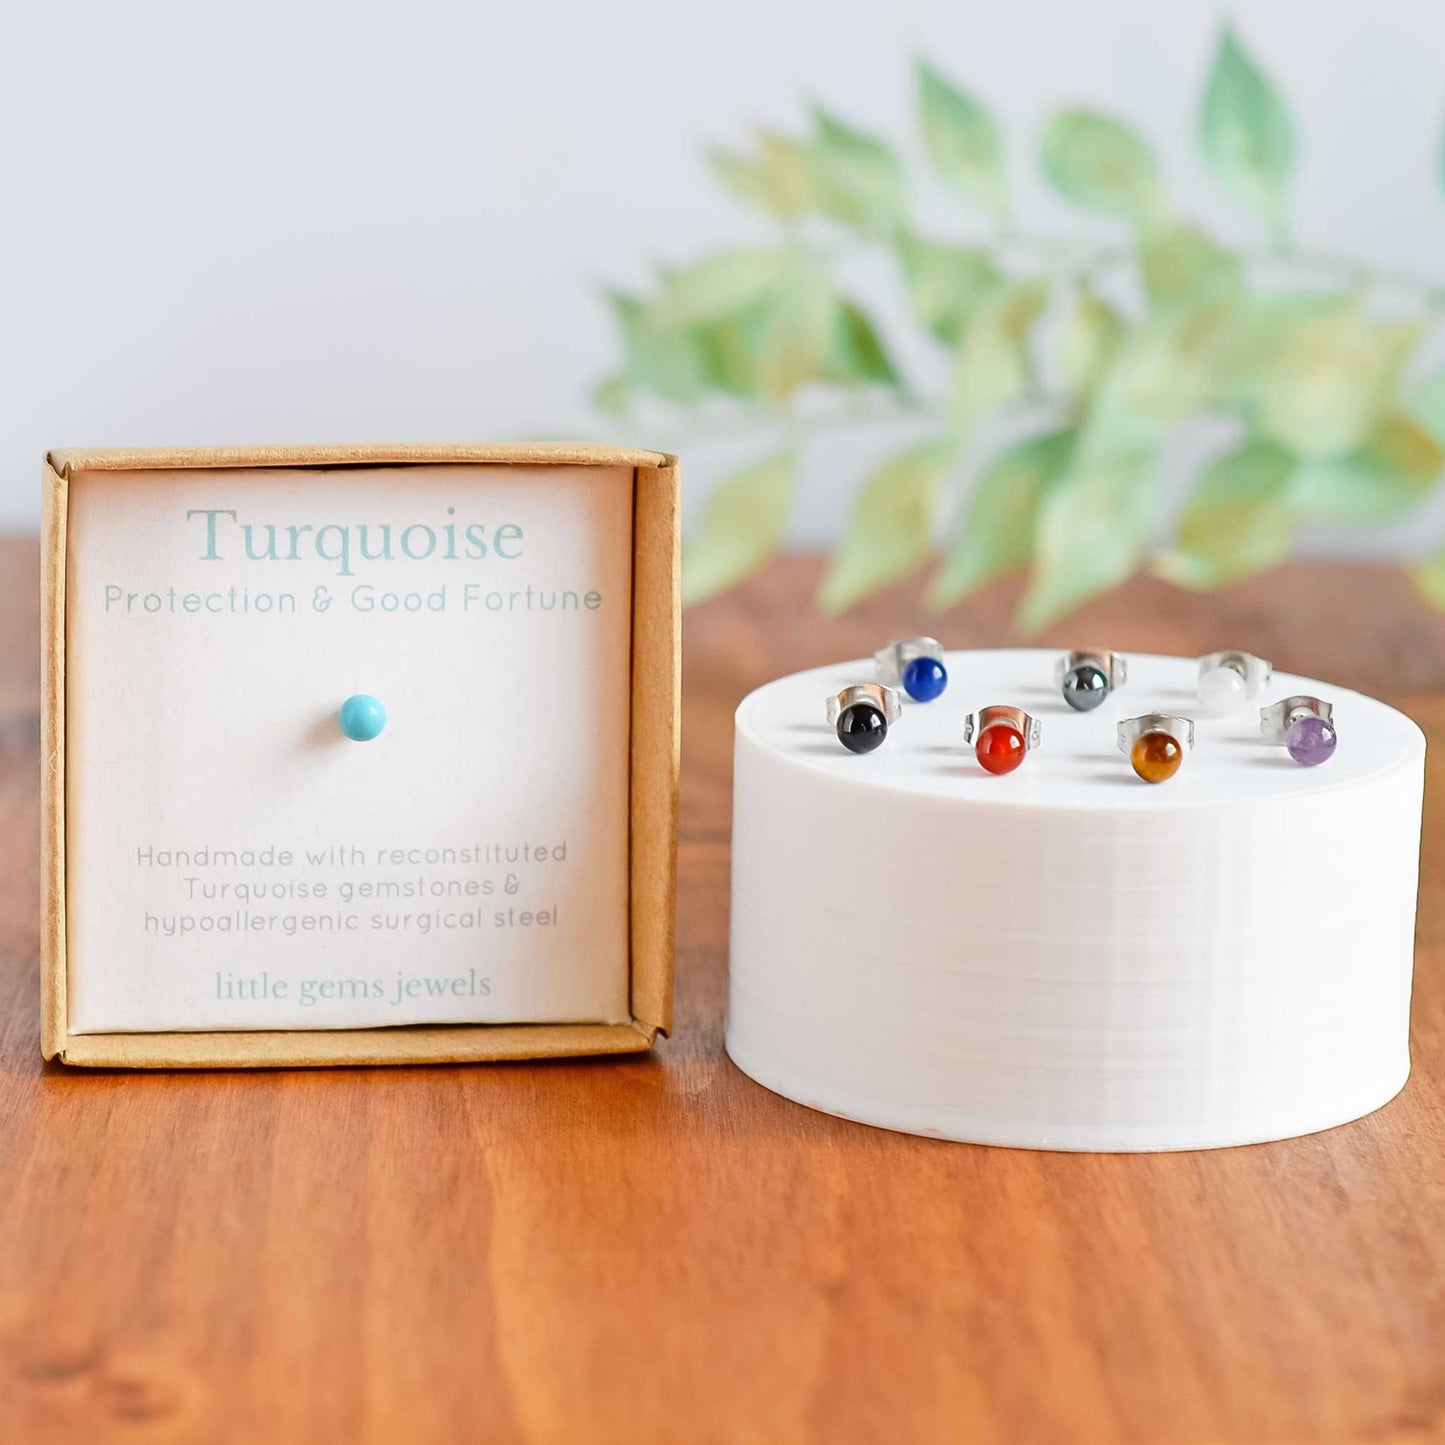 Turquoise single stud earring in box next to seven different coloured single stud earrings on white round plinth